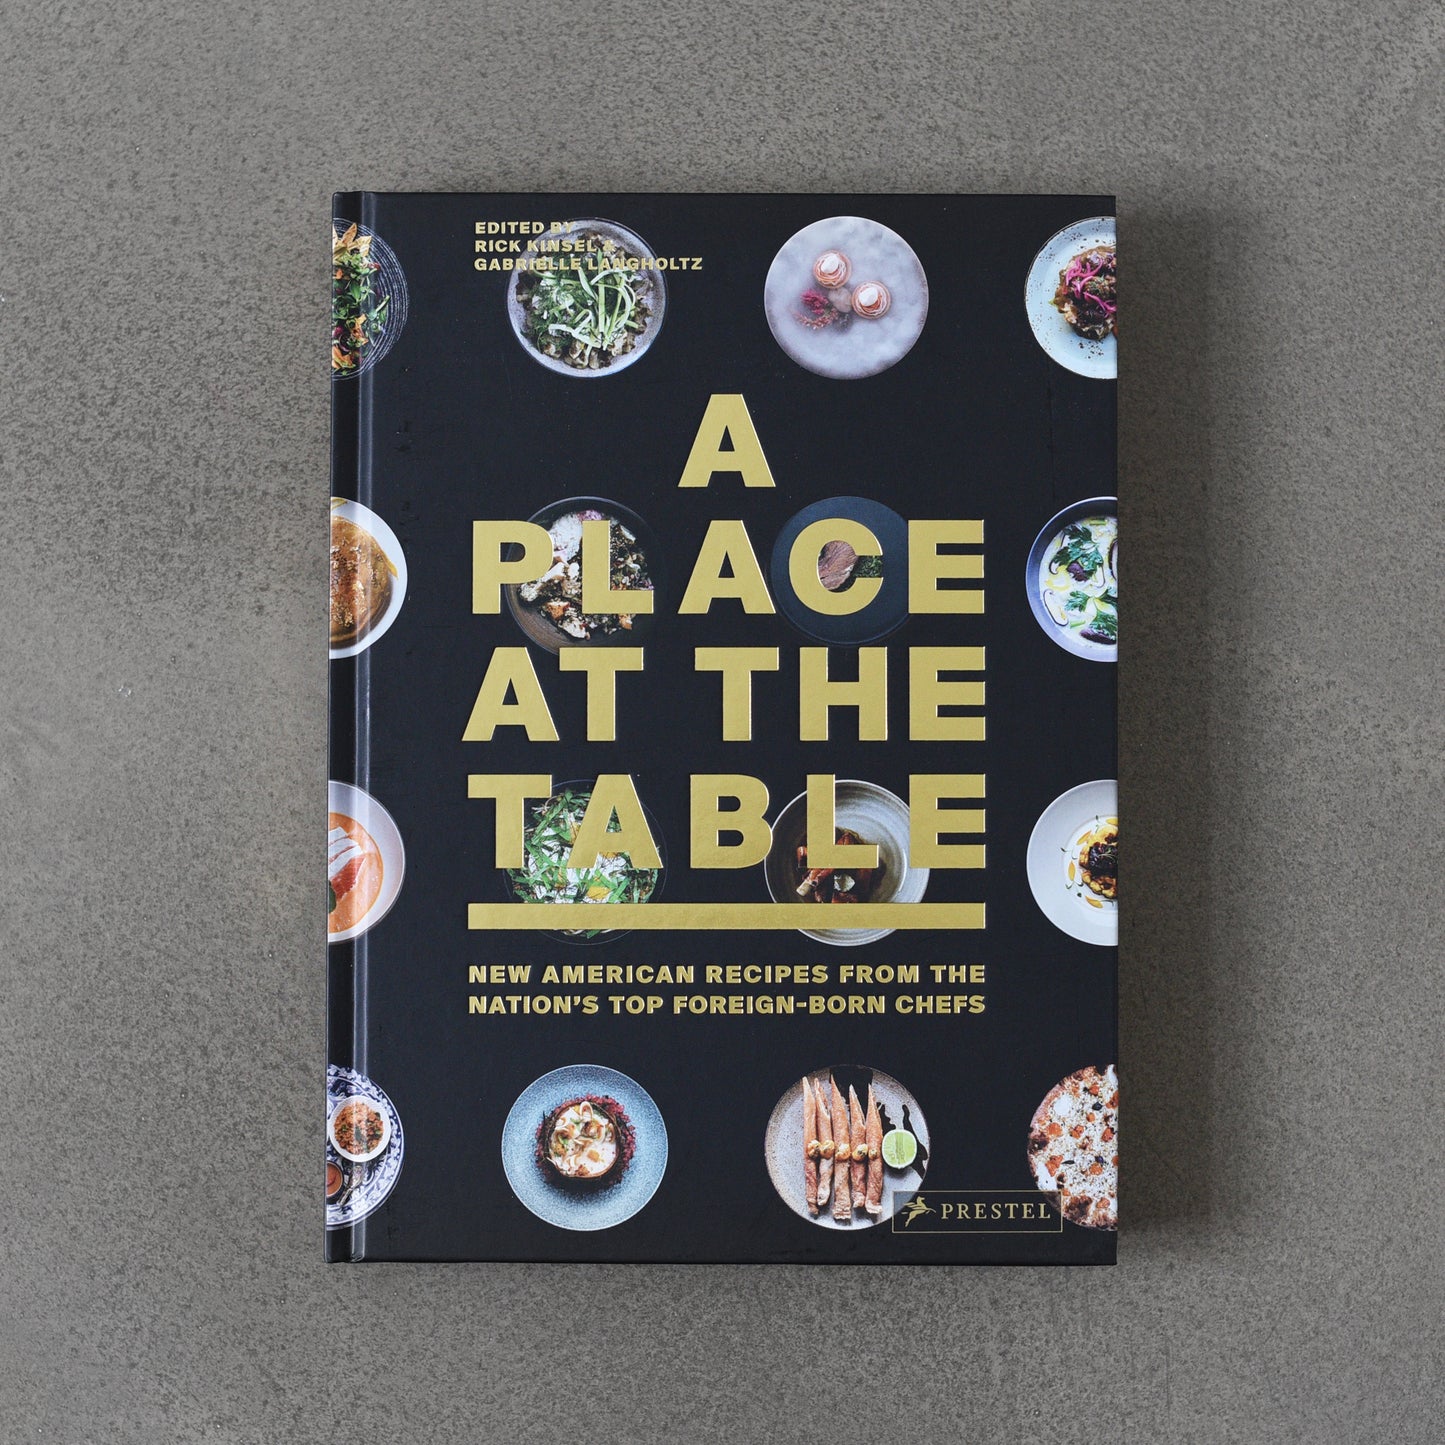 A Place at the Table: New American Recipes from the Nation’s Top Foreign-Born Chefs